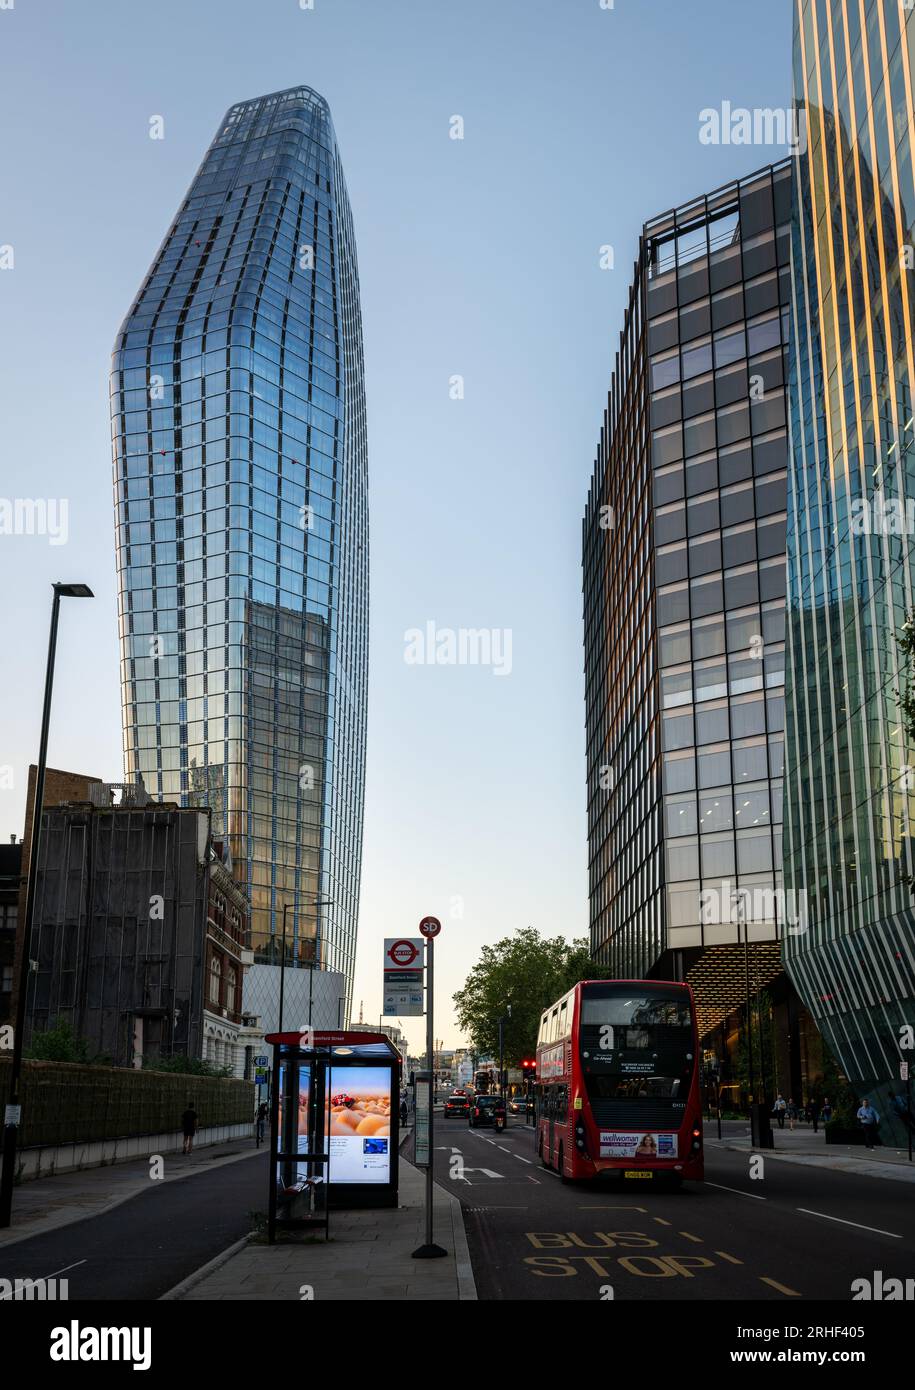 London, UK: Blackfriars Road in Southwark, London with the One Blackfriars skyscraper (left). Red London bus and bus stop in foreground. Stock Photo